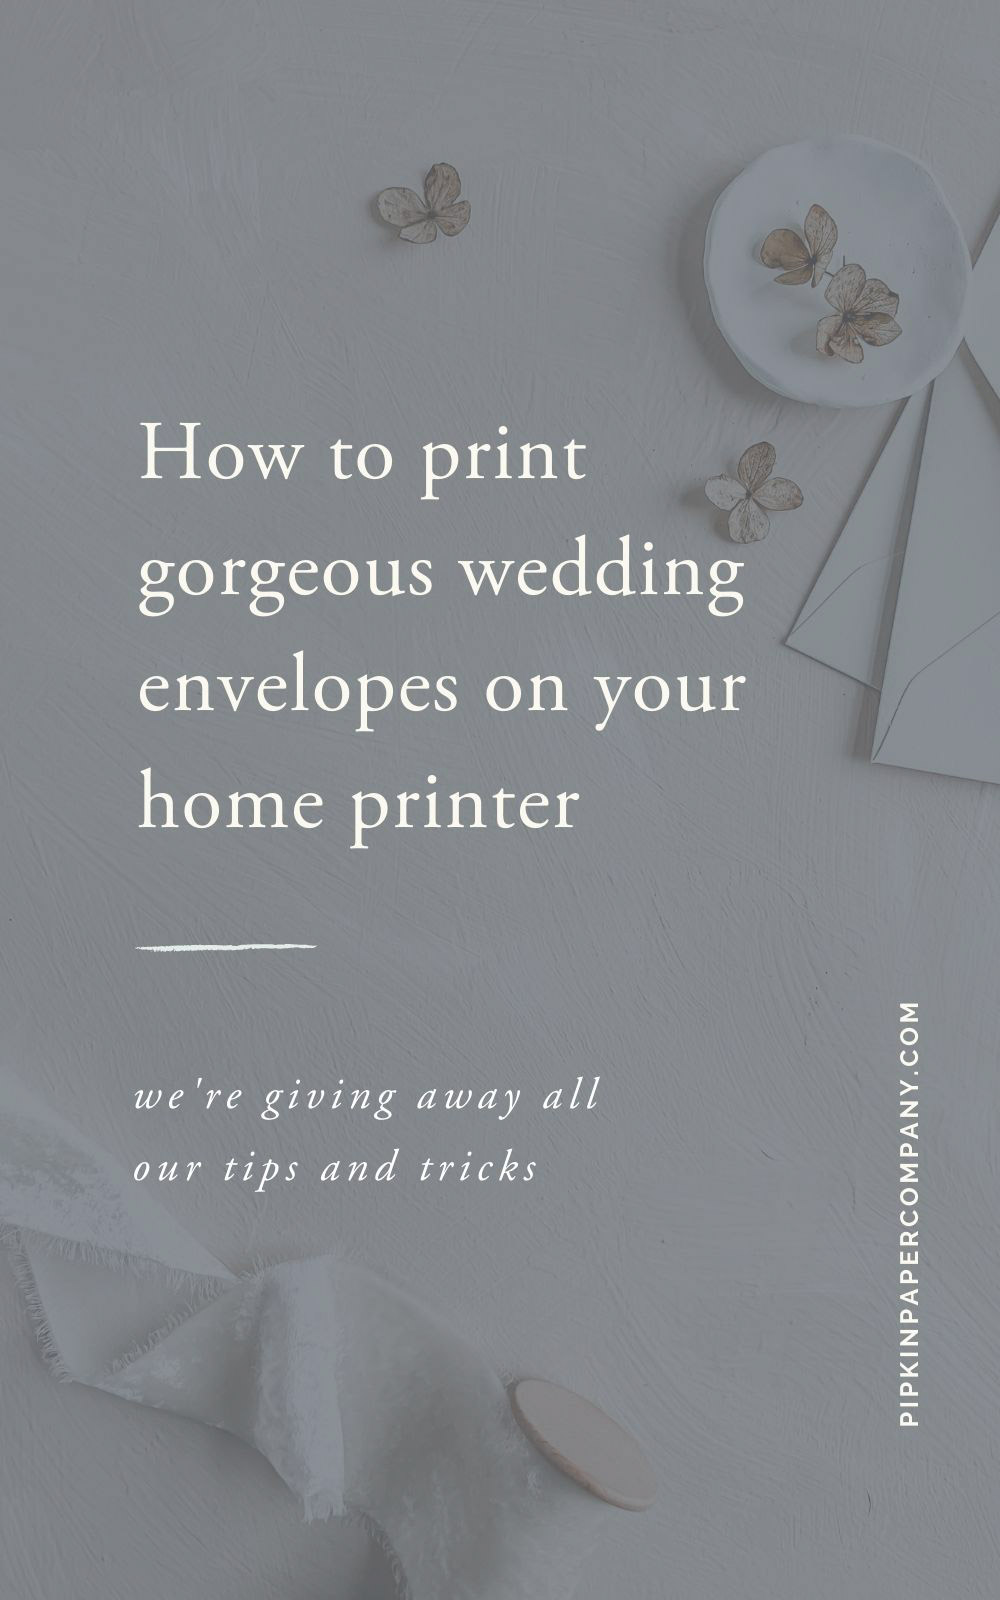 how-to-print-envelopes-the-easy-way-pipkin-paper-company